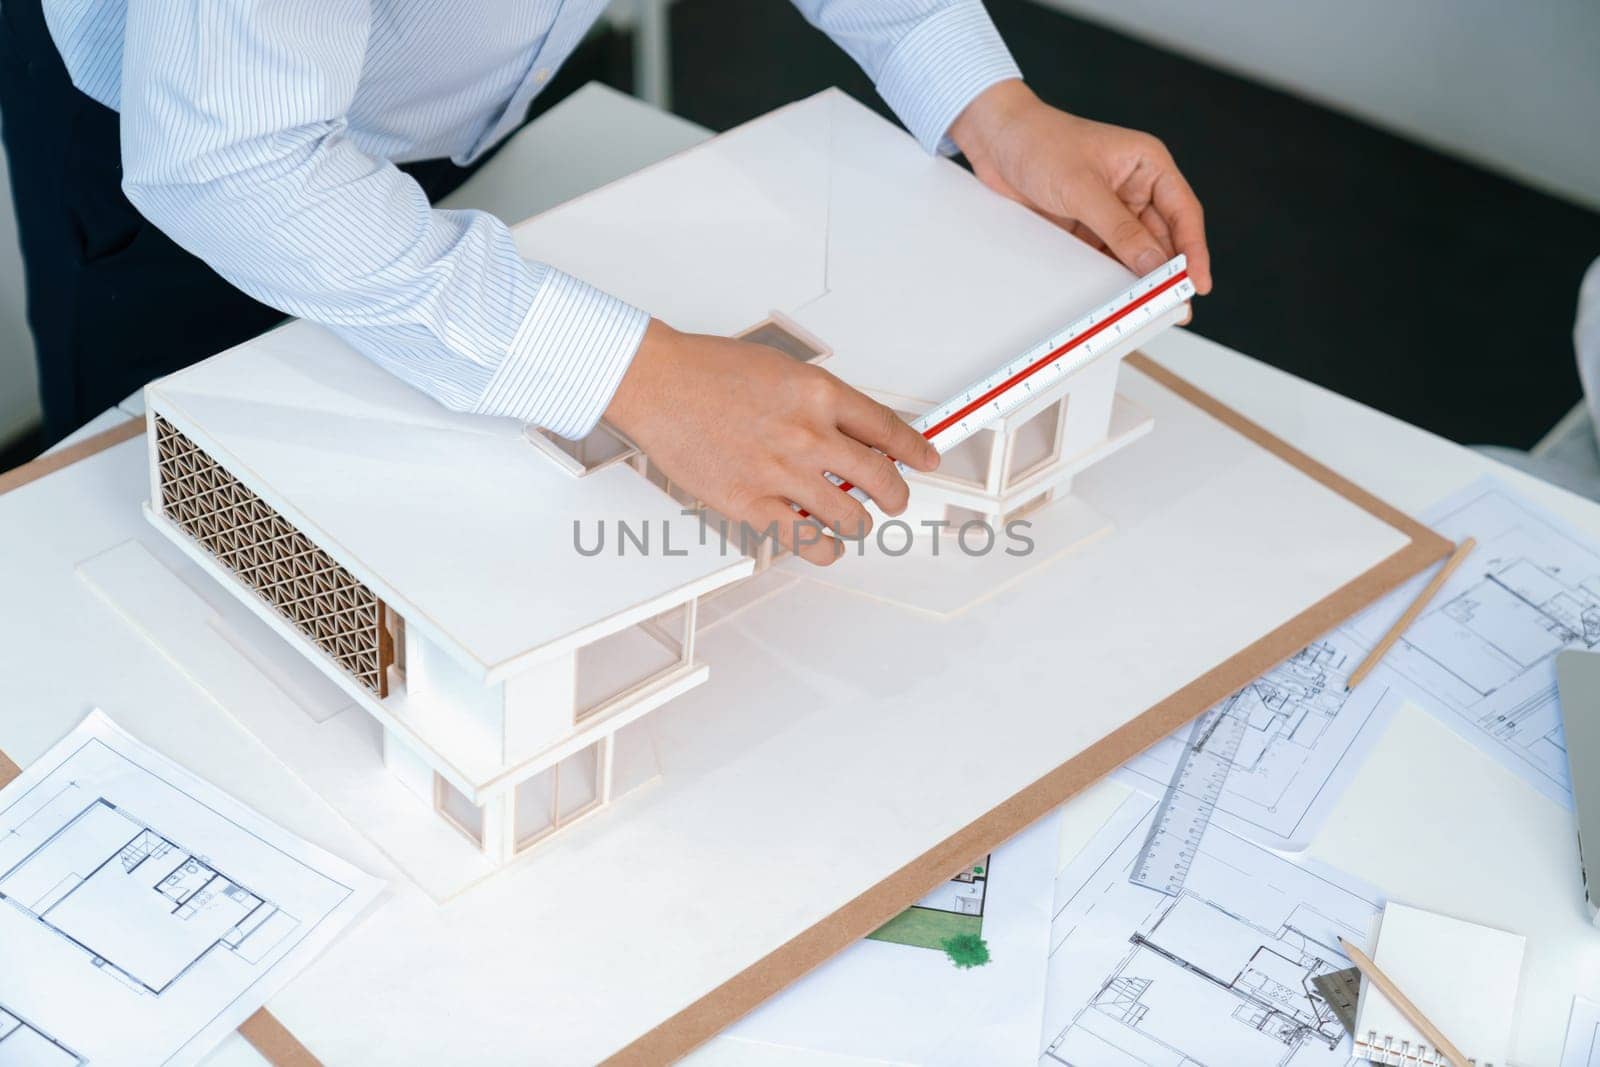 Professional engineer measures house model while skilled designer writes down in blueprint. Work together, collaboration, cooperate. Creative design and team working concept. Top view. Immaculate.